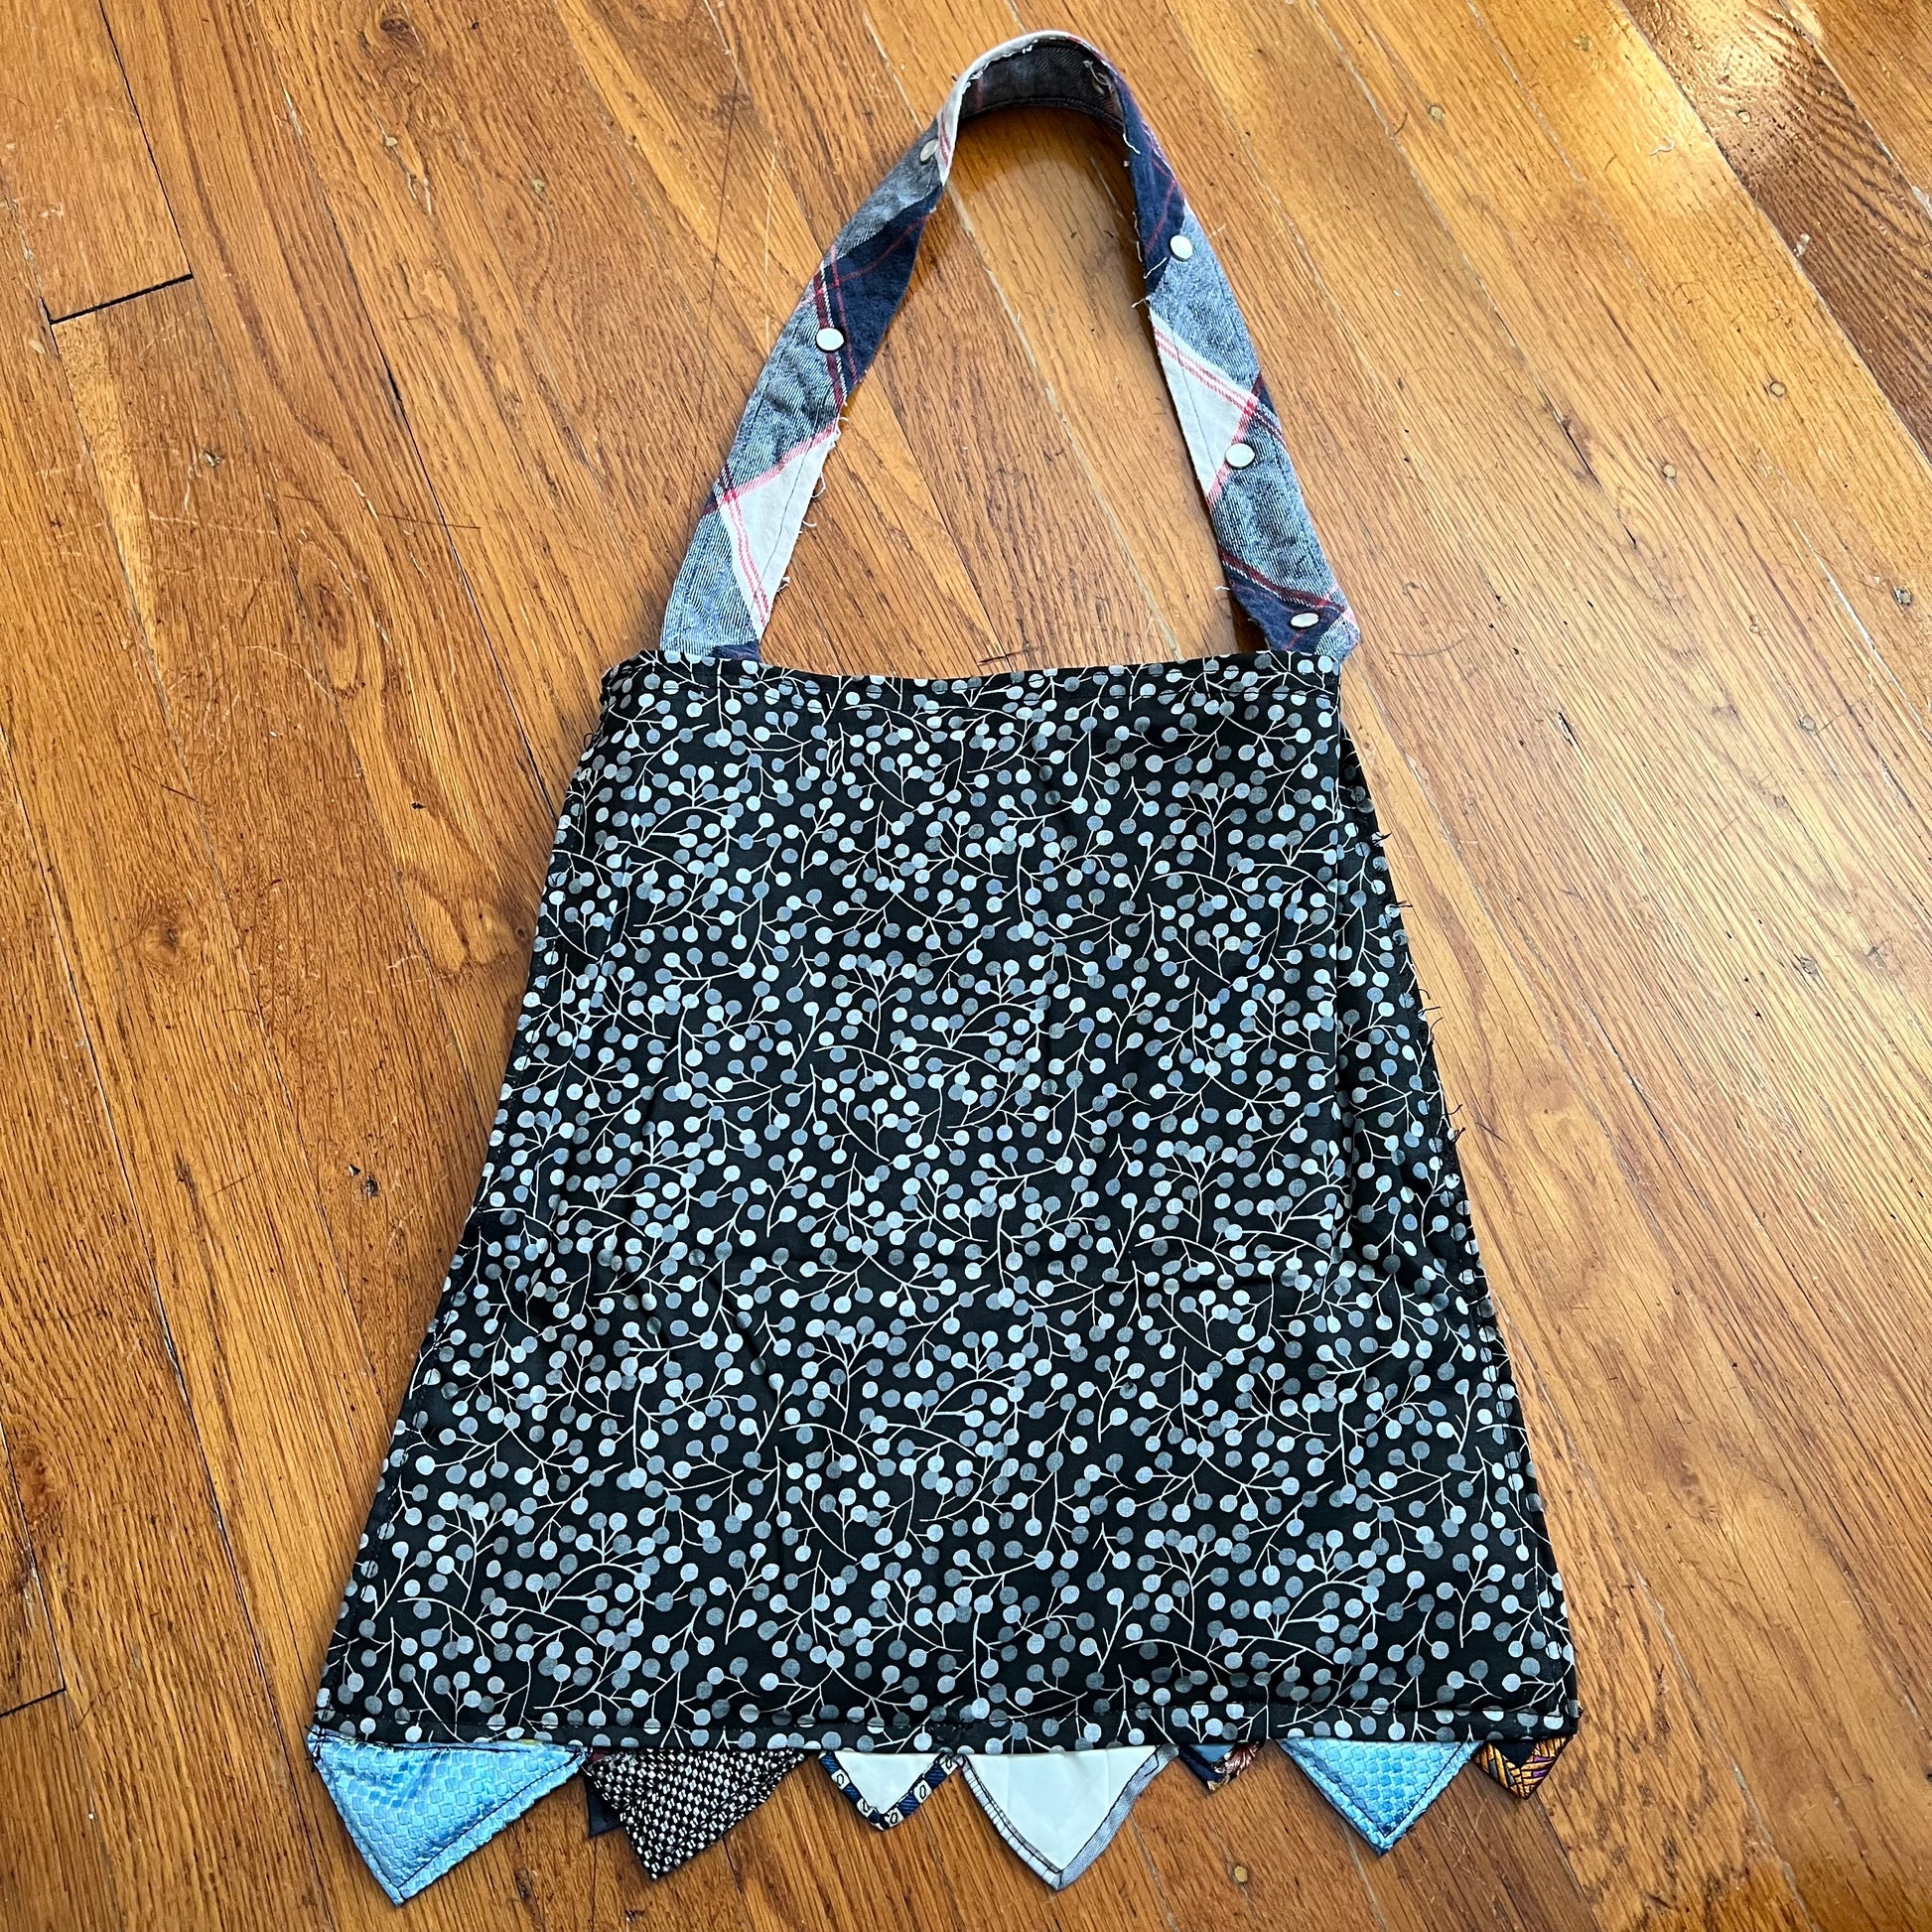 aerial back view of the teal tote bag, in a dotty black floral material against a wood background